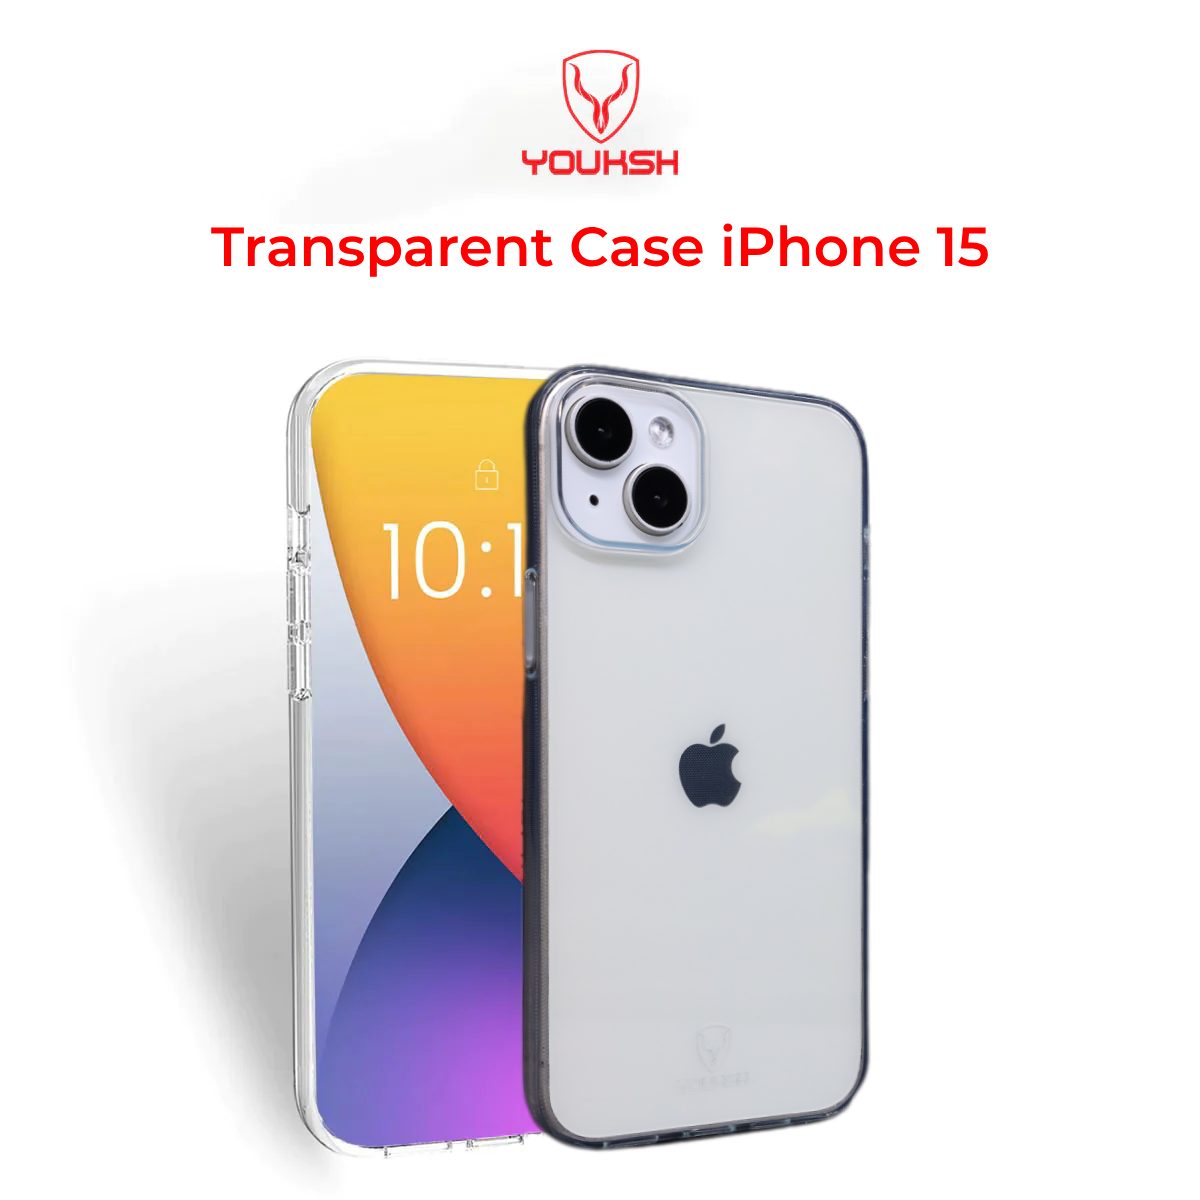 YOUKSH Apple iPhone 15 Transparent Case | Soft Shock Proof Jelly Cover